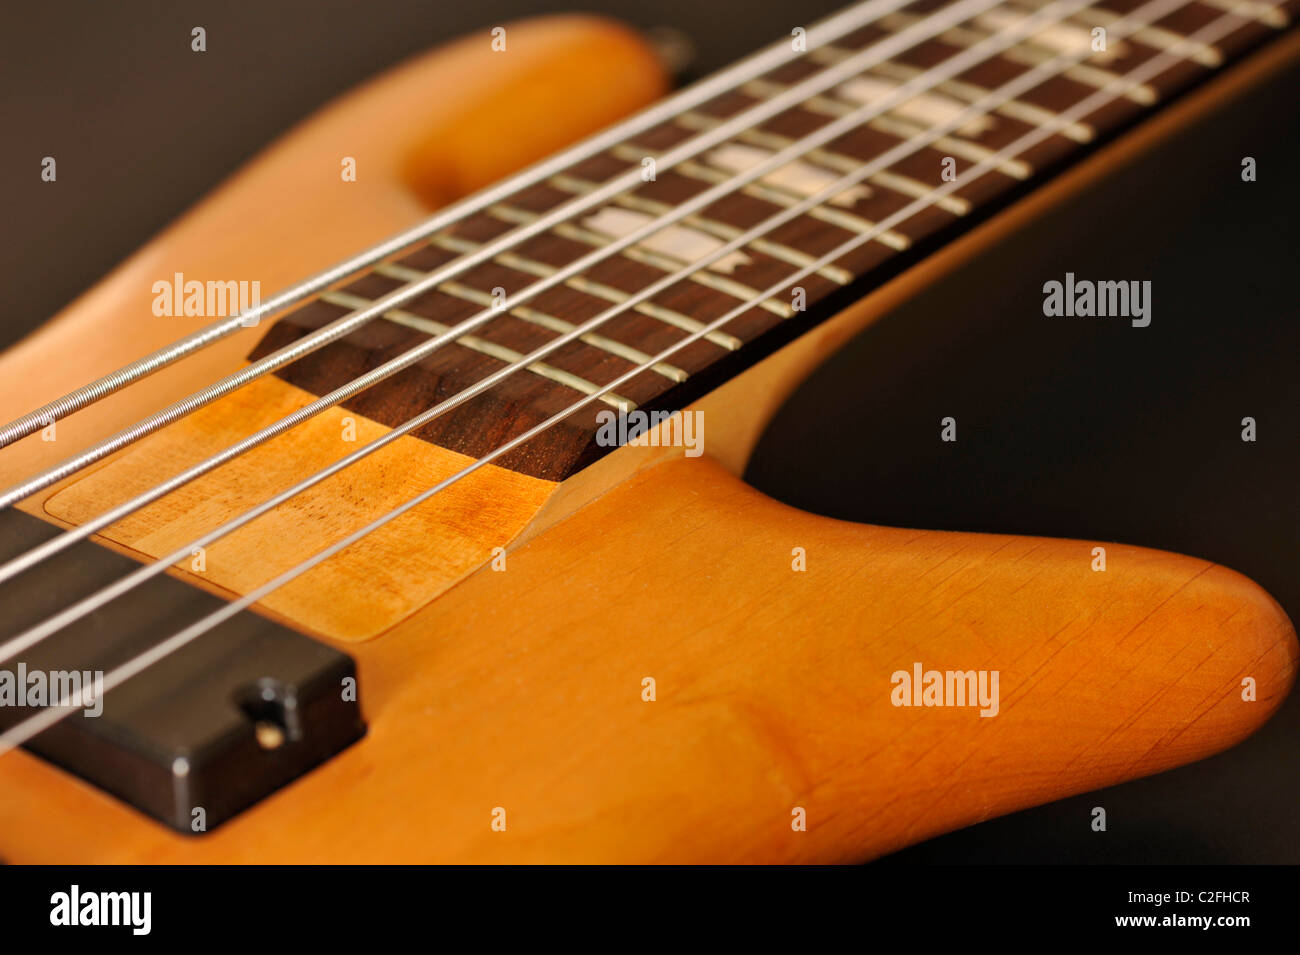 Close-up of strings and cut-away body of a 5-string electric bass guitar Stock Photo